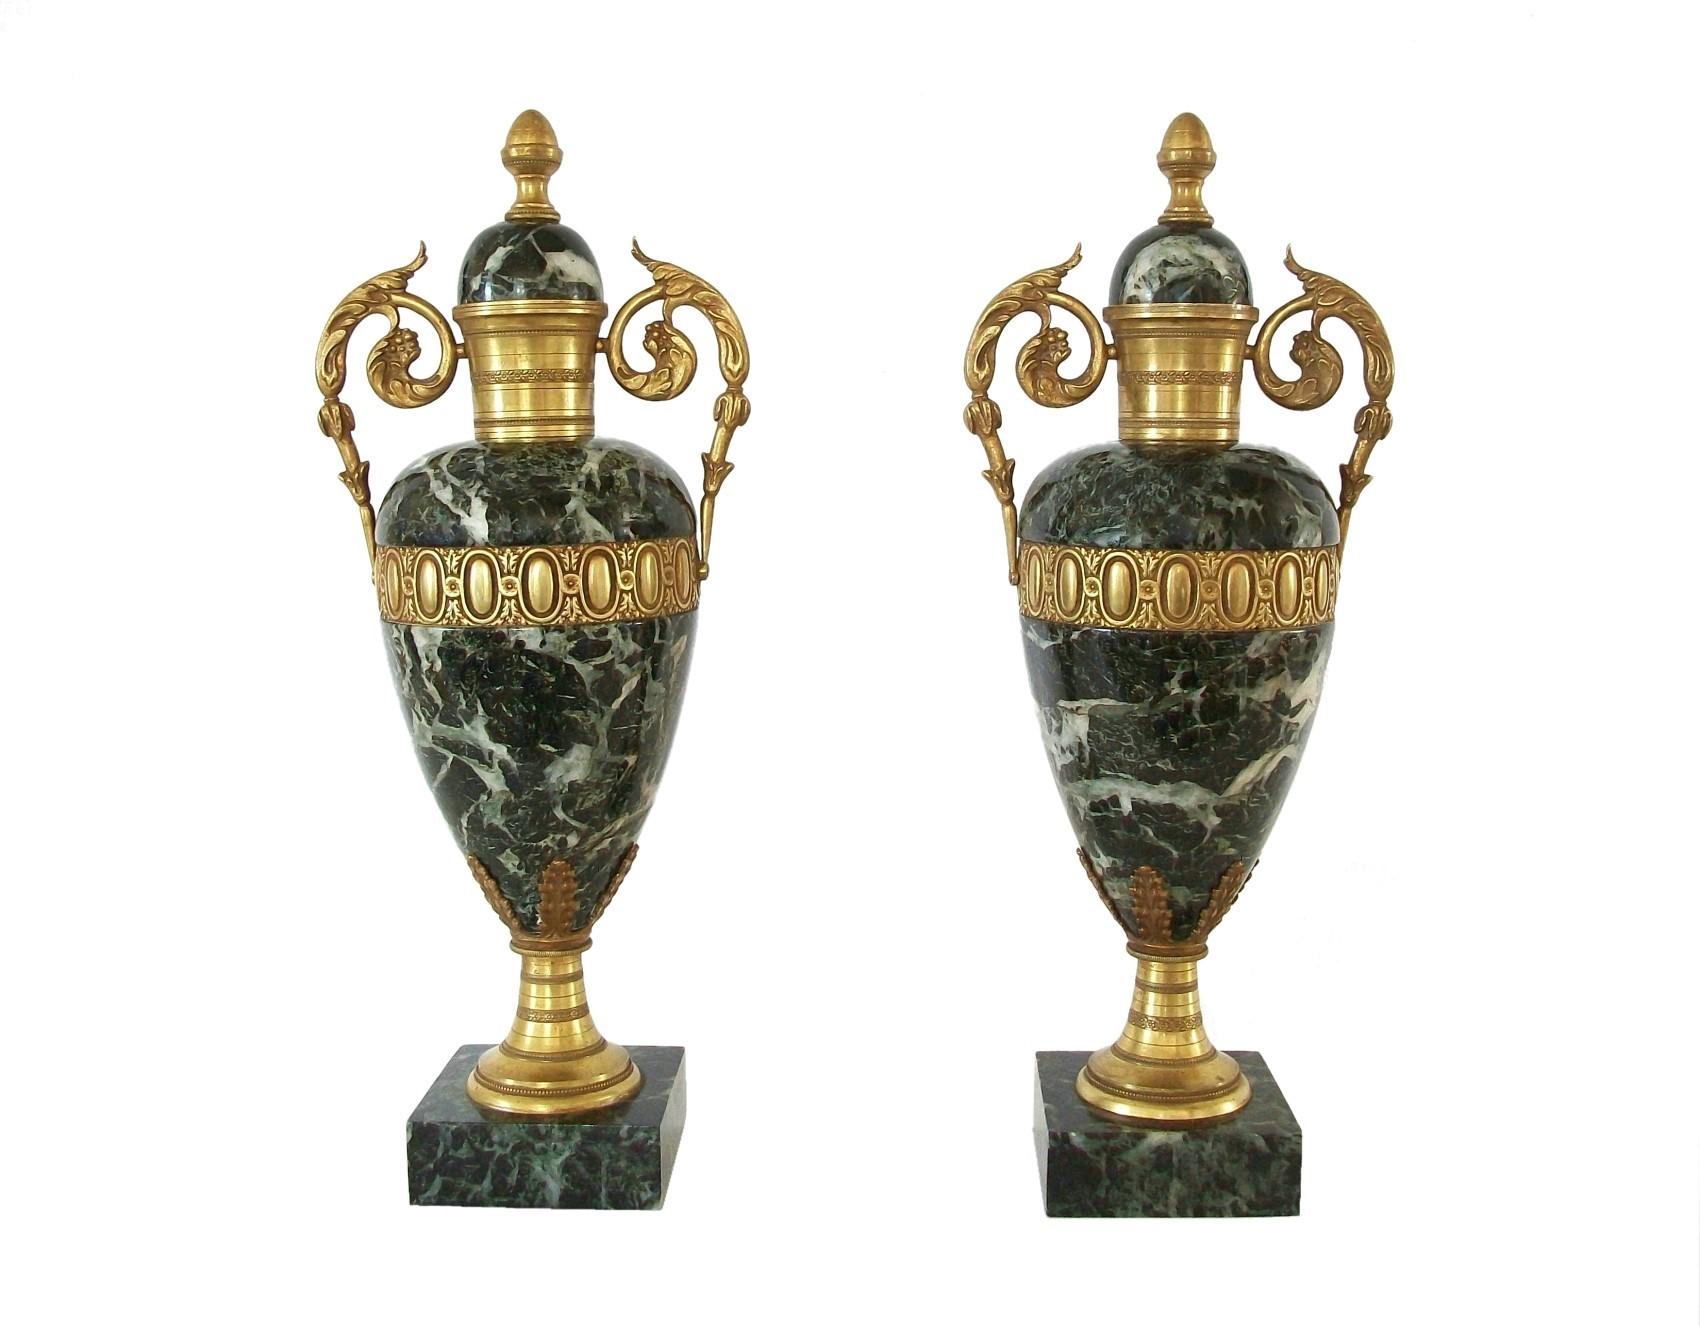 Fine pair of Louis XVI style Verde Antico Marble and gilt bronze urns - featuring fine chasing and casting to the bronze elements - lids not removable - shallow enough in depth to fit most fireplace mantels - could also be electrified as lamps -